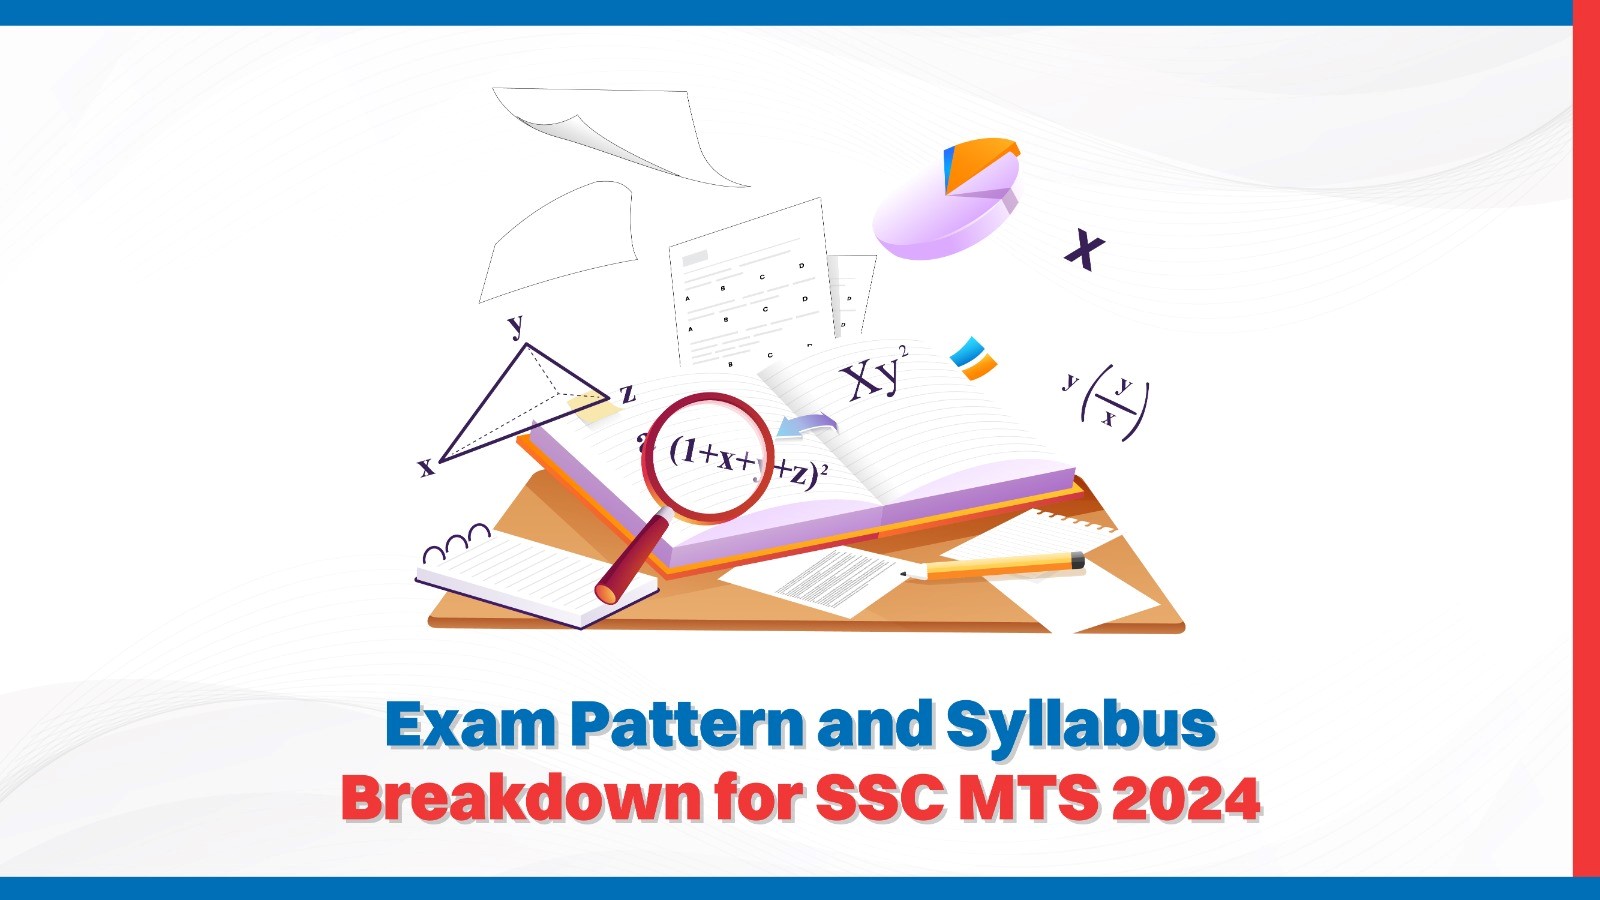 Exam Pattern and Syllabus Breakdown for SSC MTS 2024.jpg